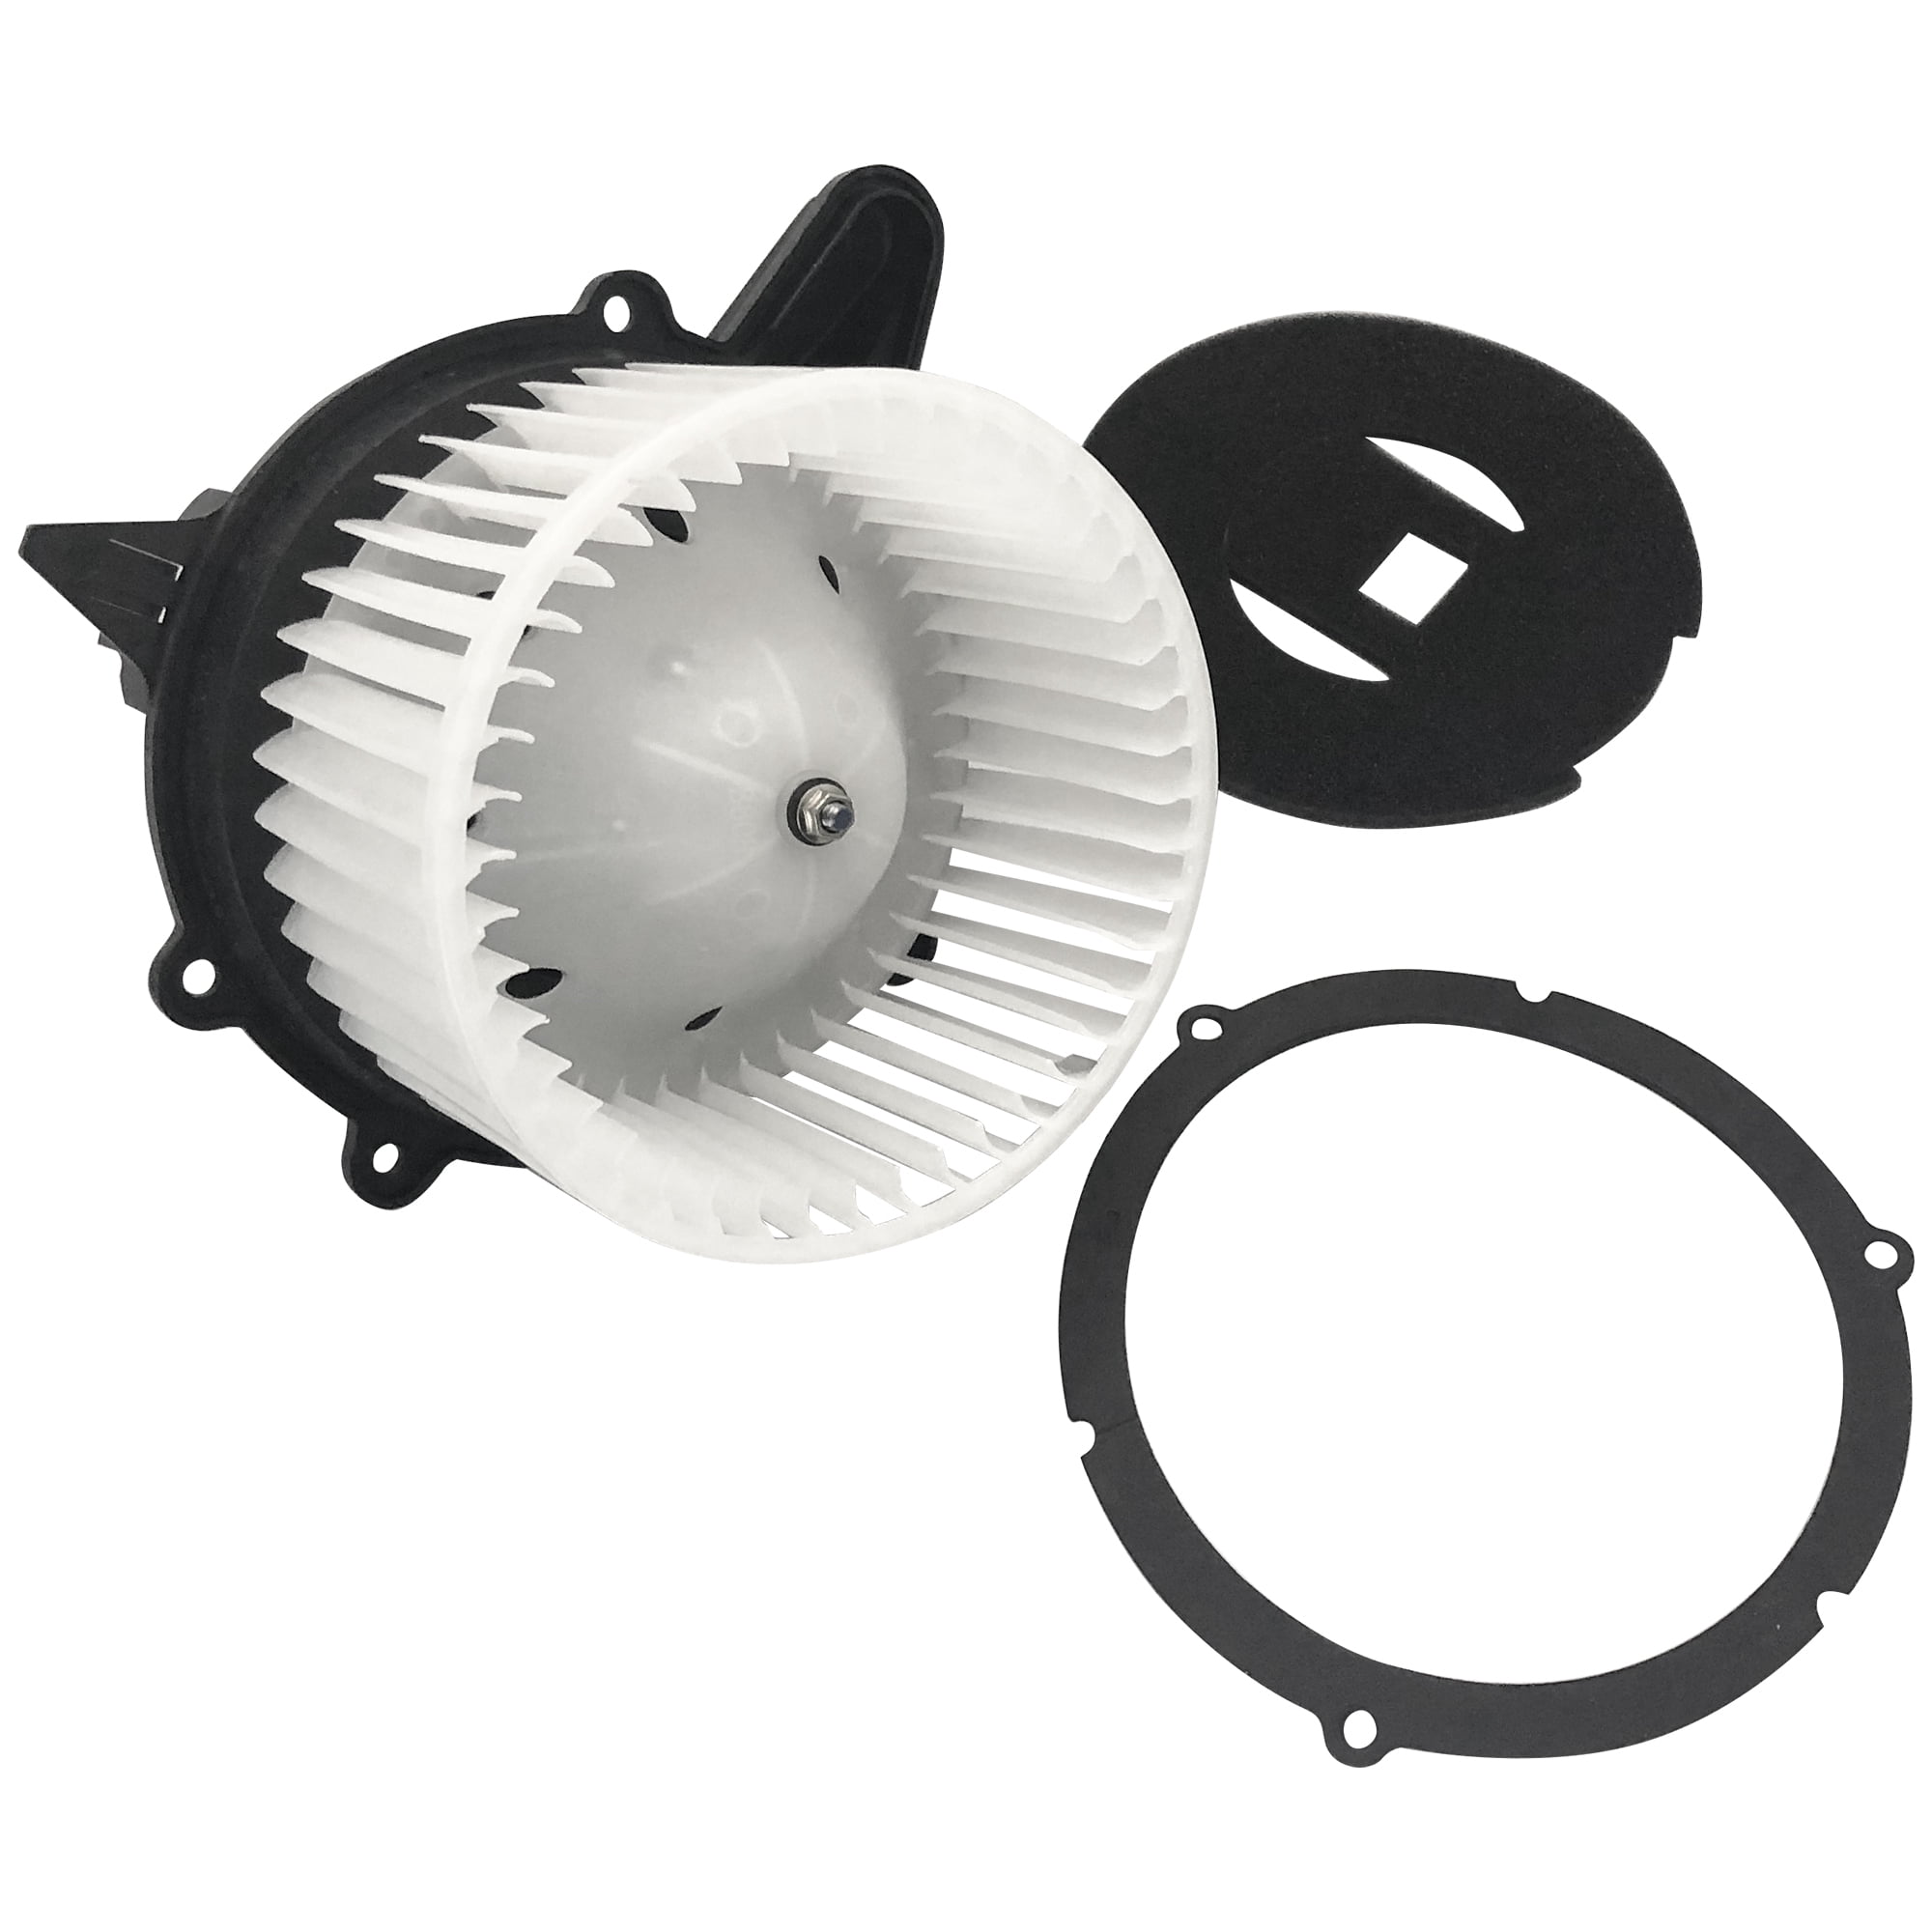 2002-2003 Lincoln Blackwood HVAC Blower Motor Assembly 700027 FO3126104 Heater Blower Motor with Fan Cage for 1997-2002 Ford Expedition 1997-1999 Ford F-250 1997-2003 Ford F-150 1998-2002 Lincoln 